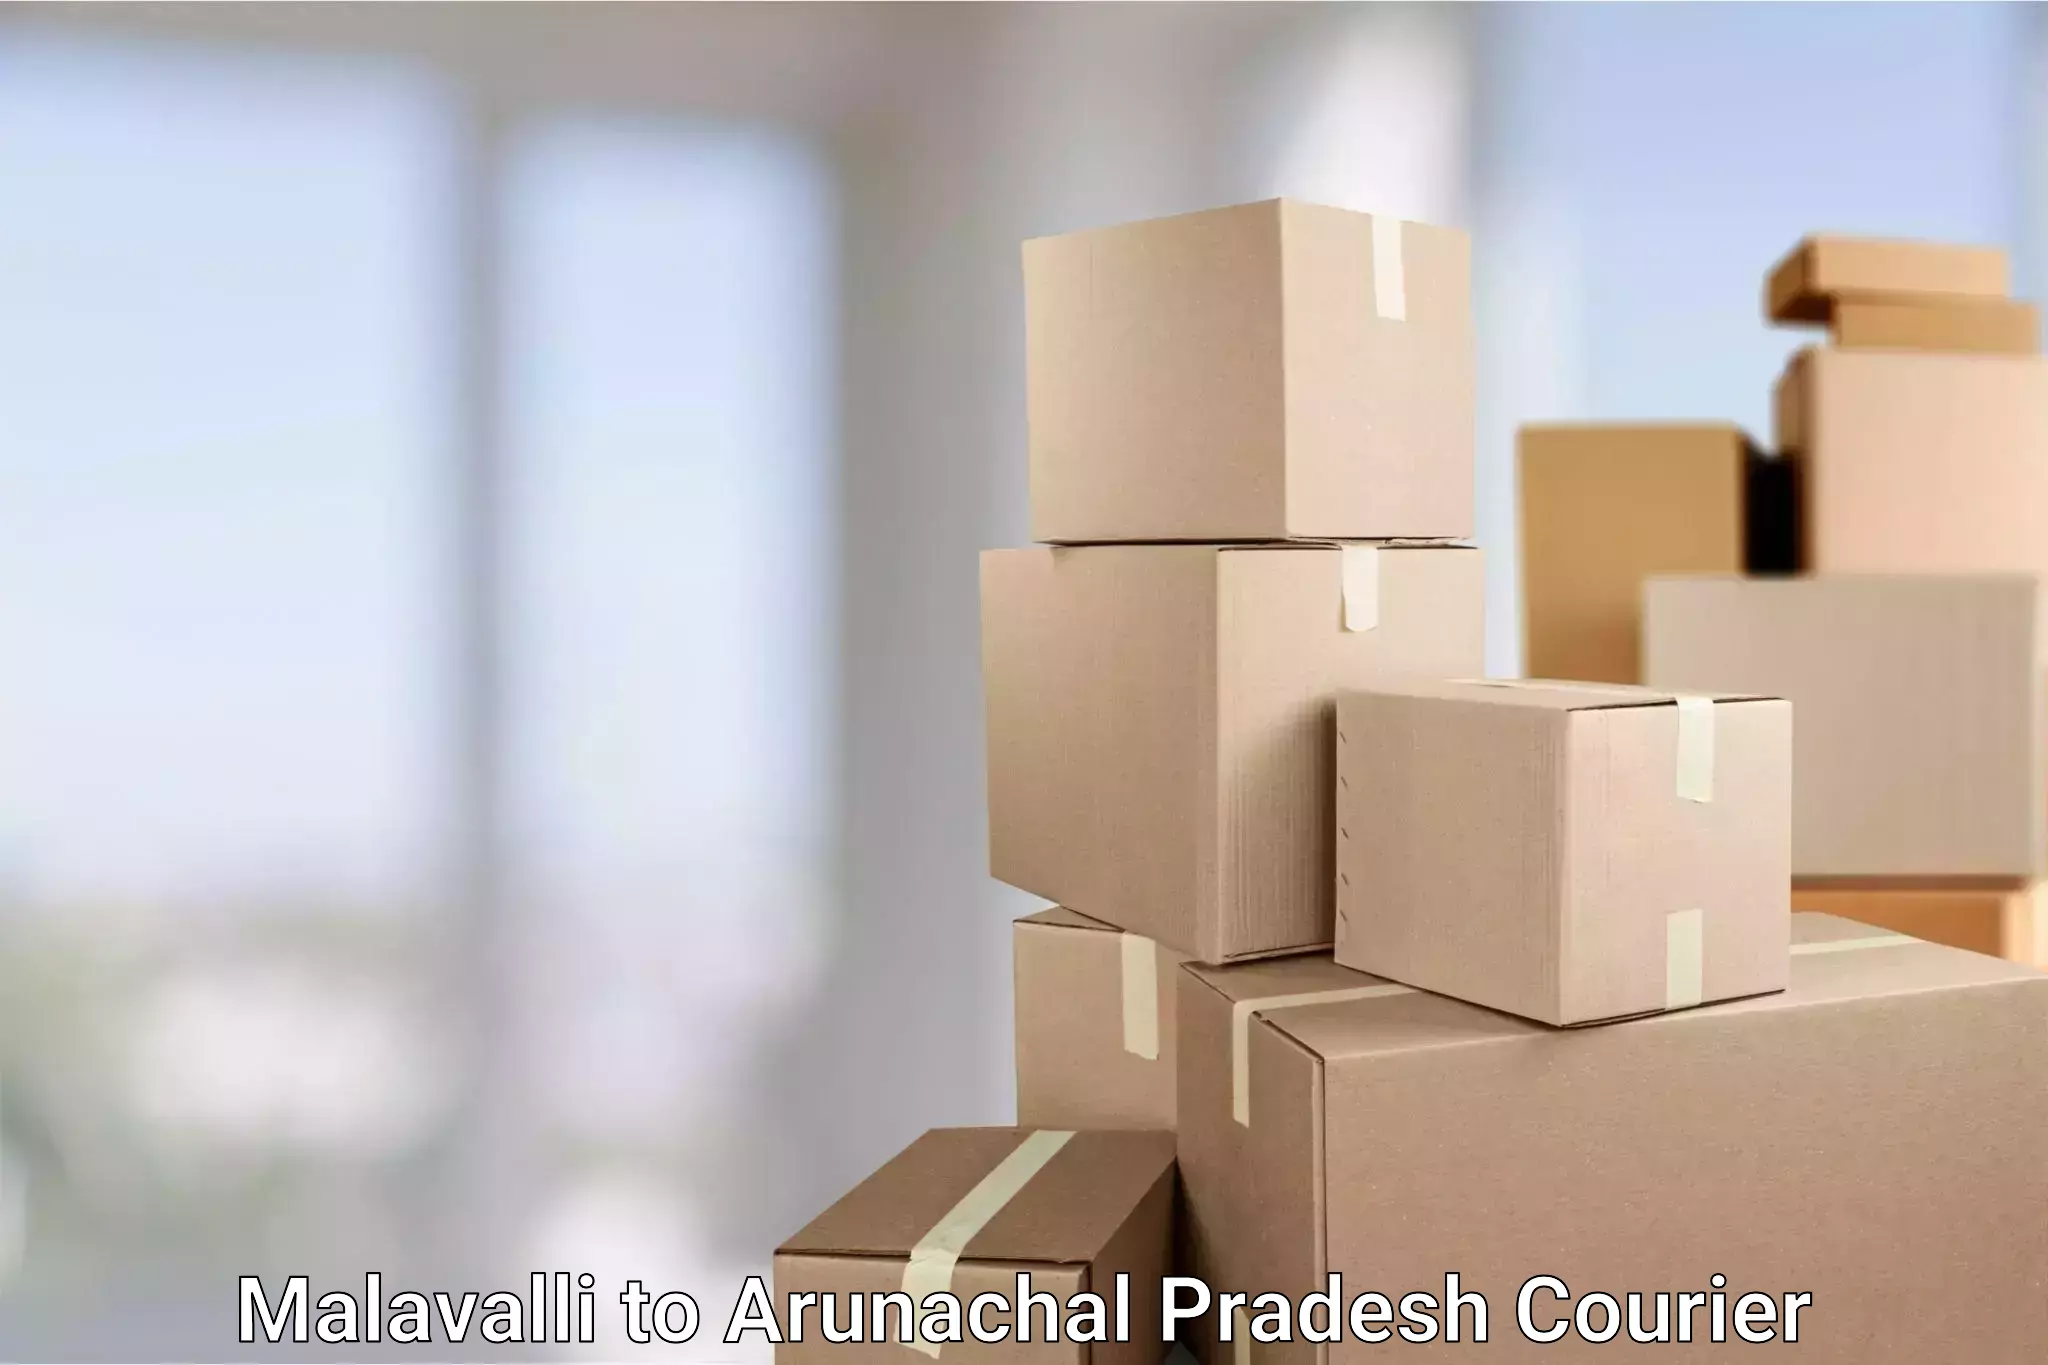 Global courier networks Malavalli to Deomali